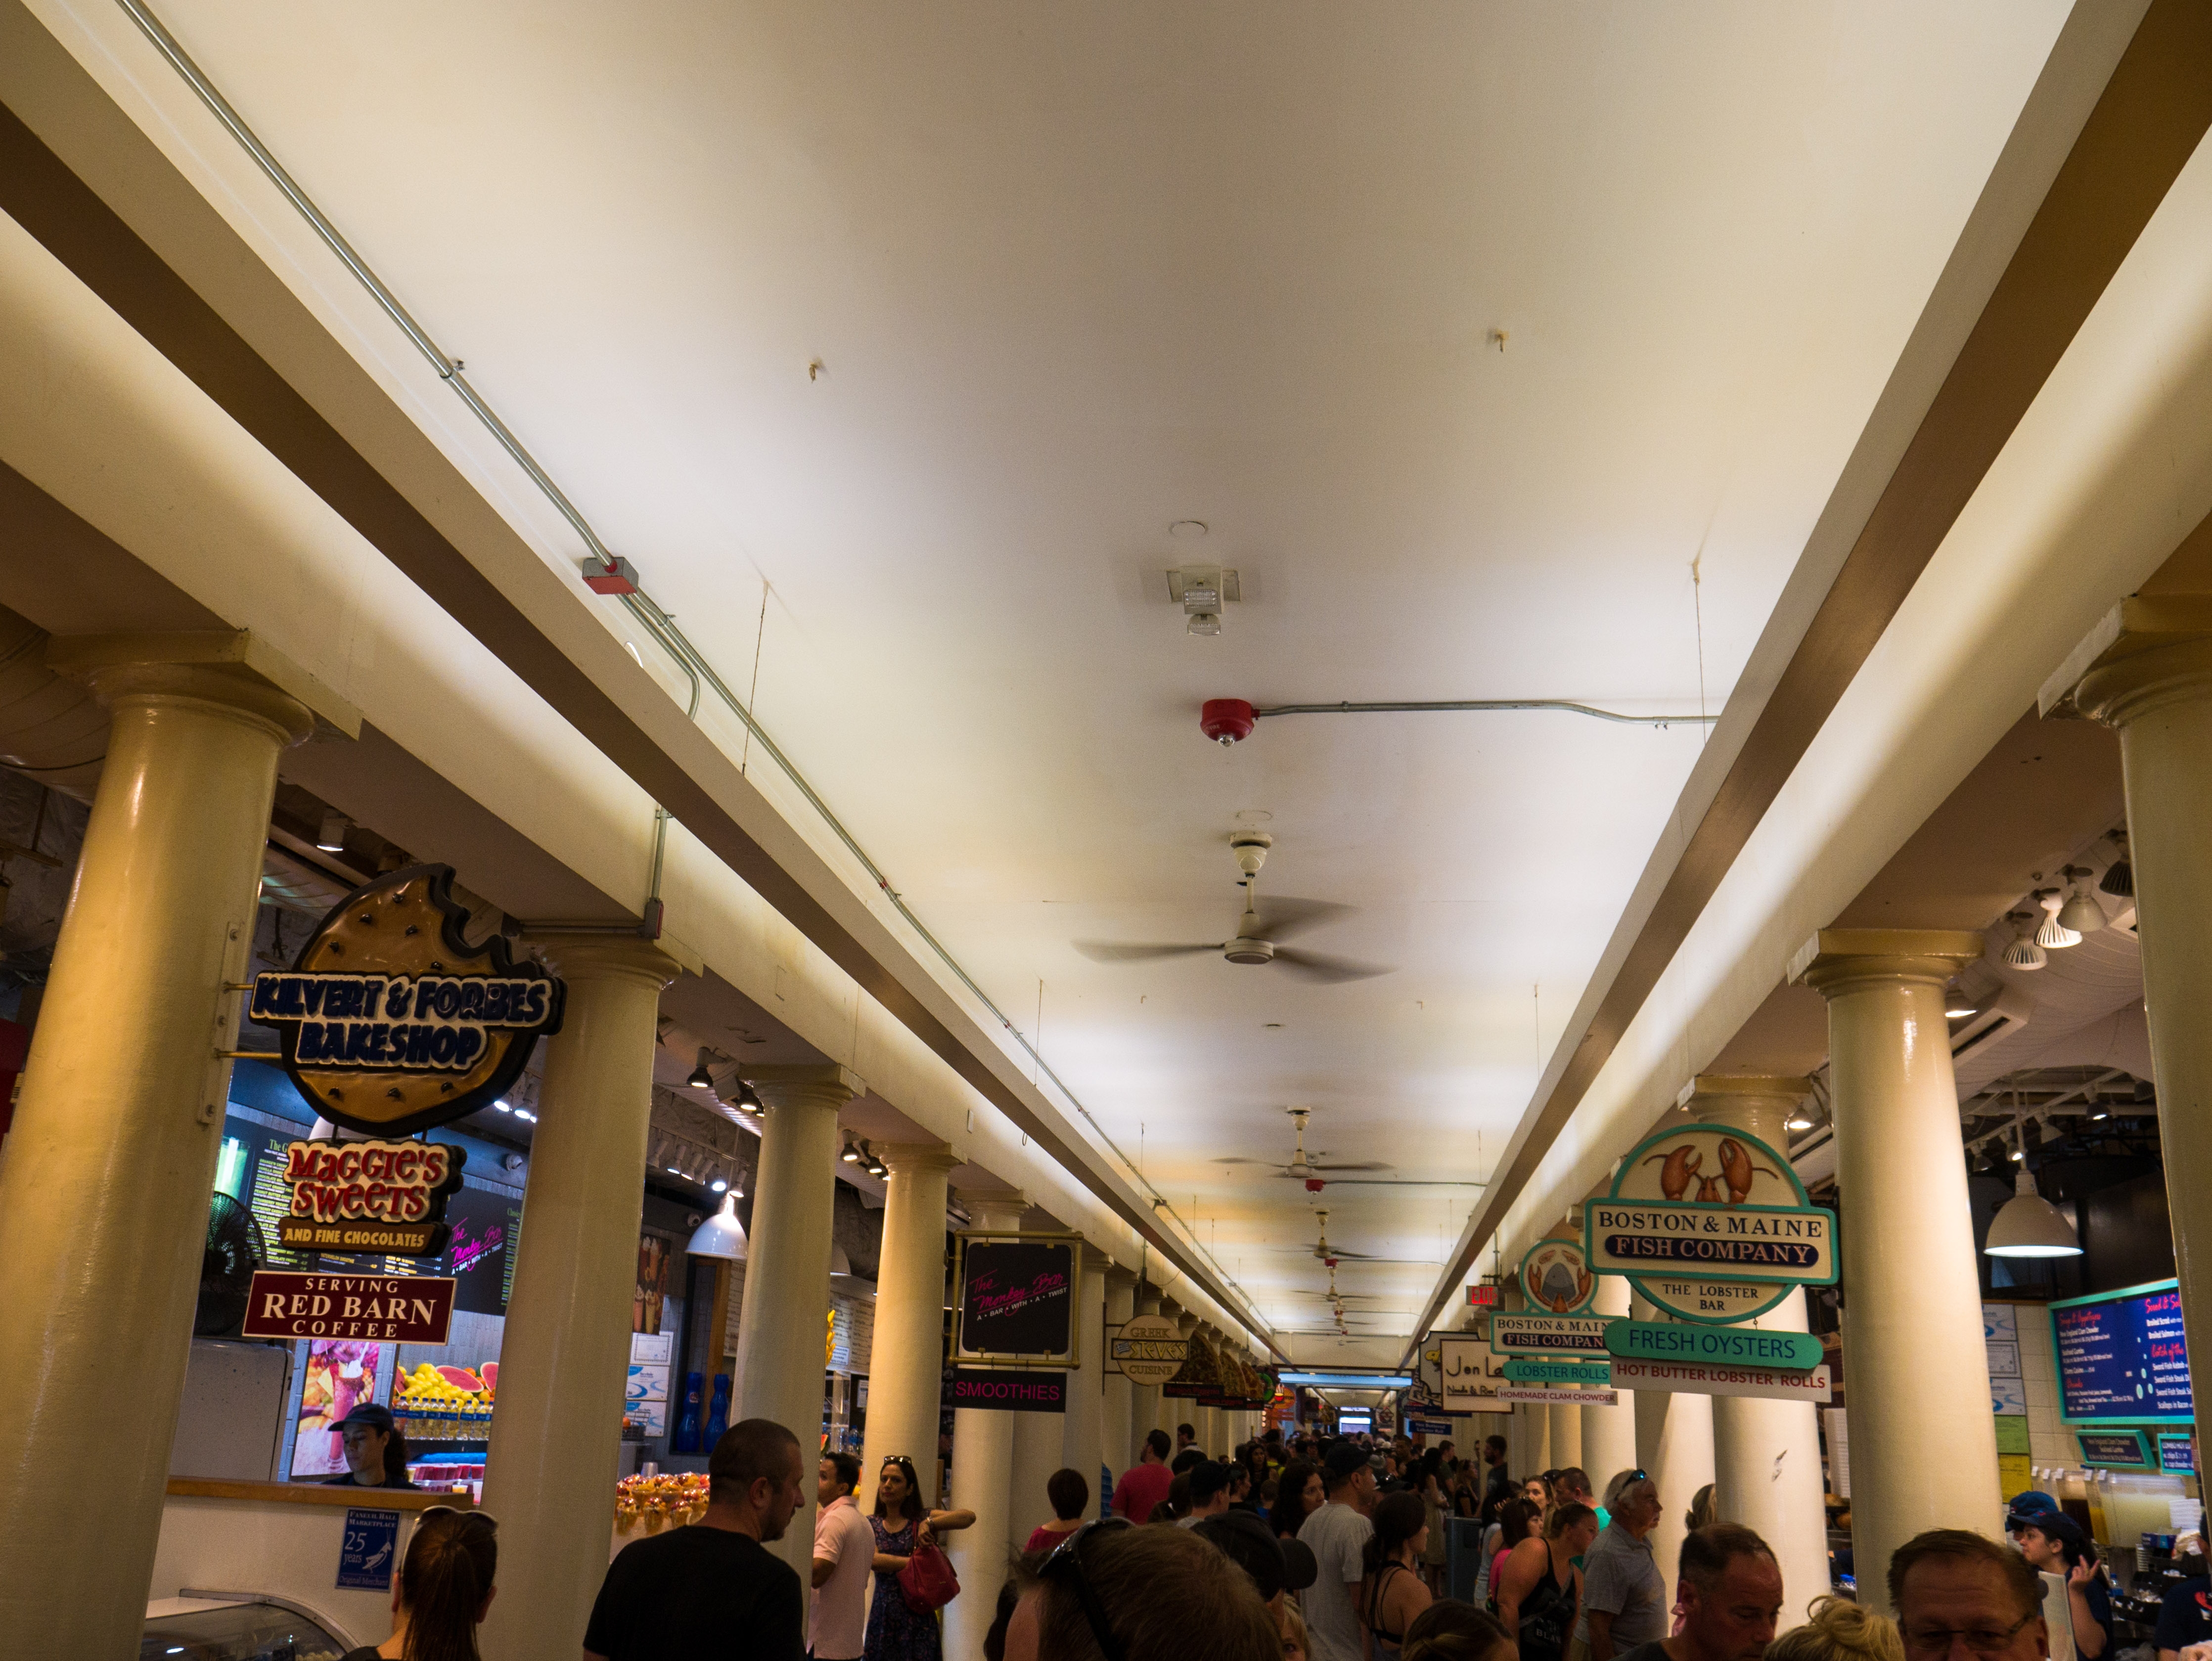 The inside of Quincy Market